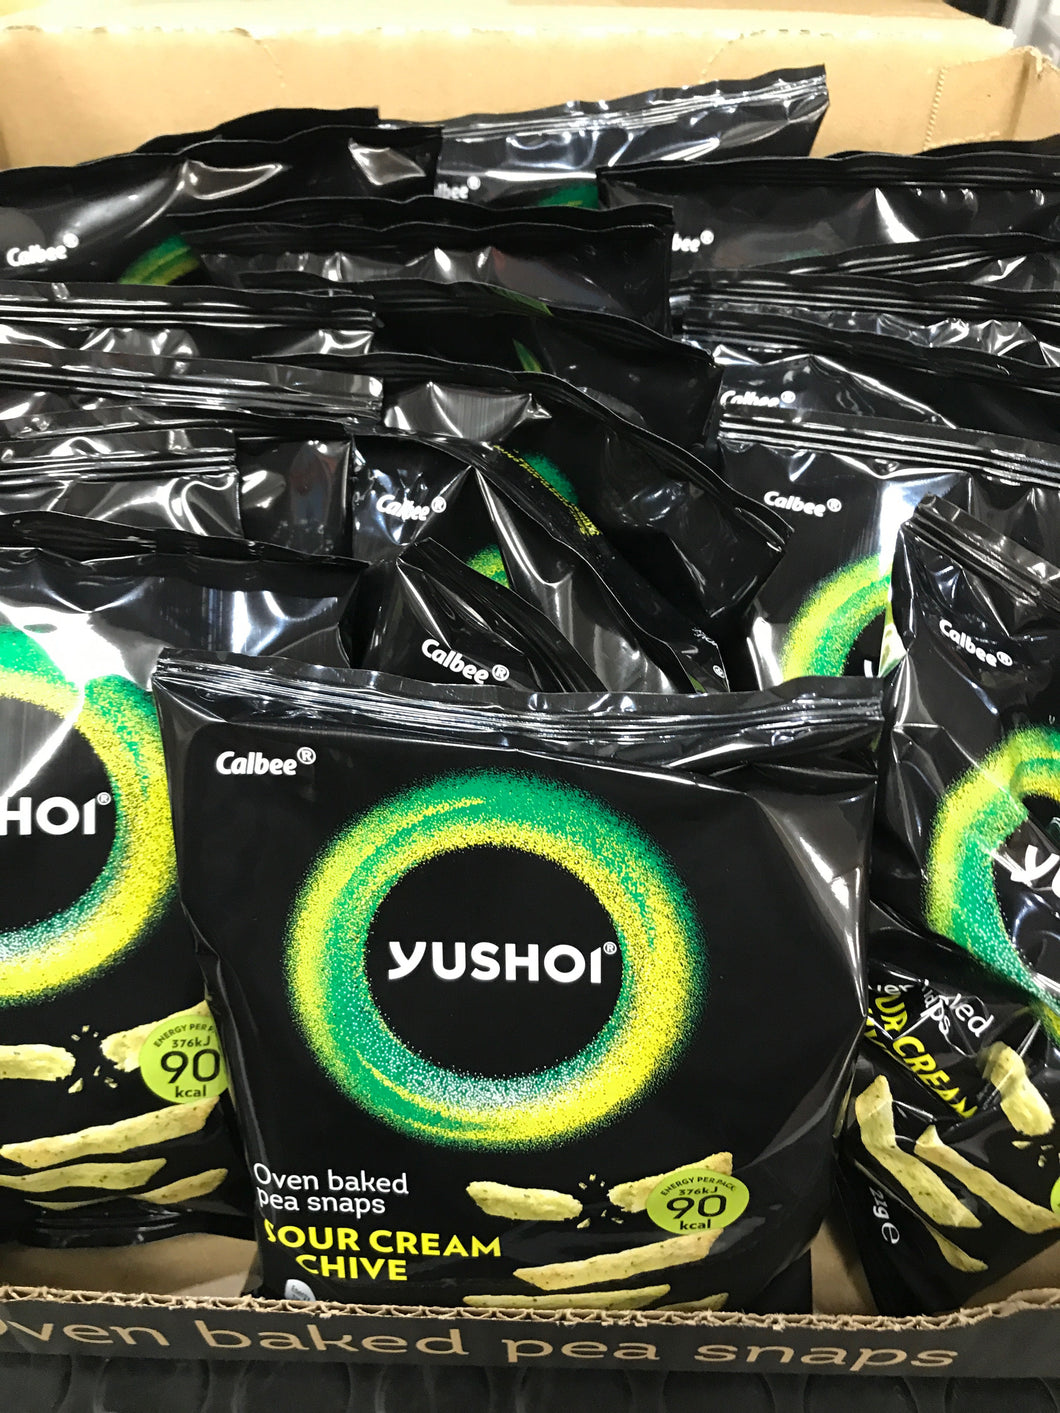 24x Yushoi Sour Cream & Chive Baked Pea Snacks (24x21g)